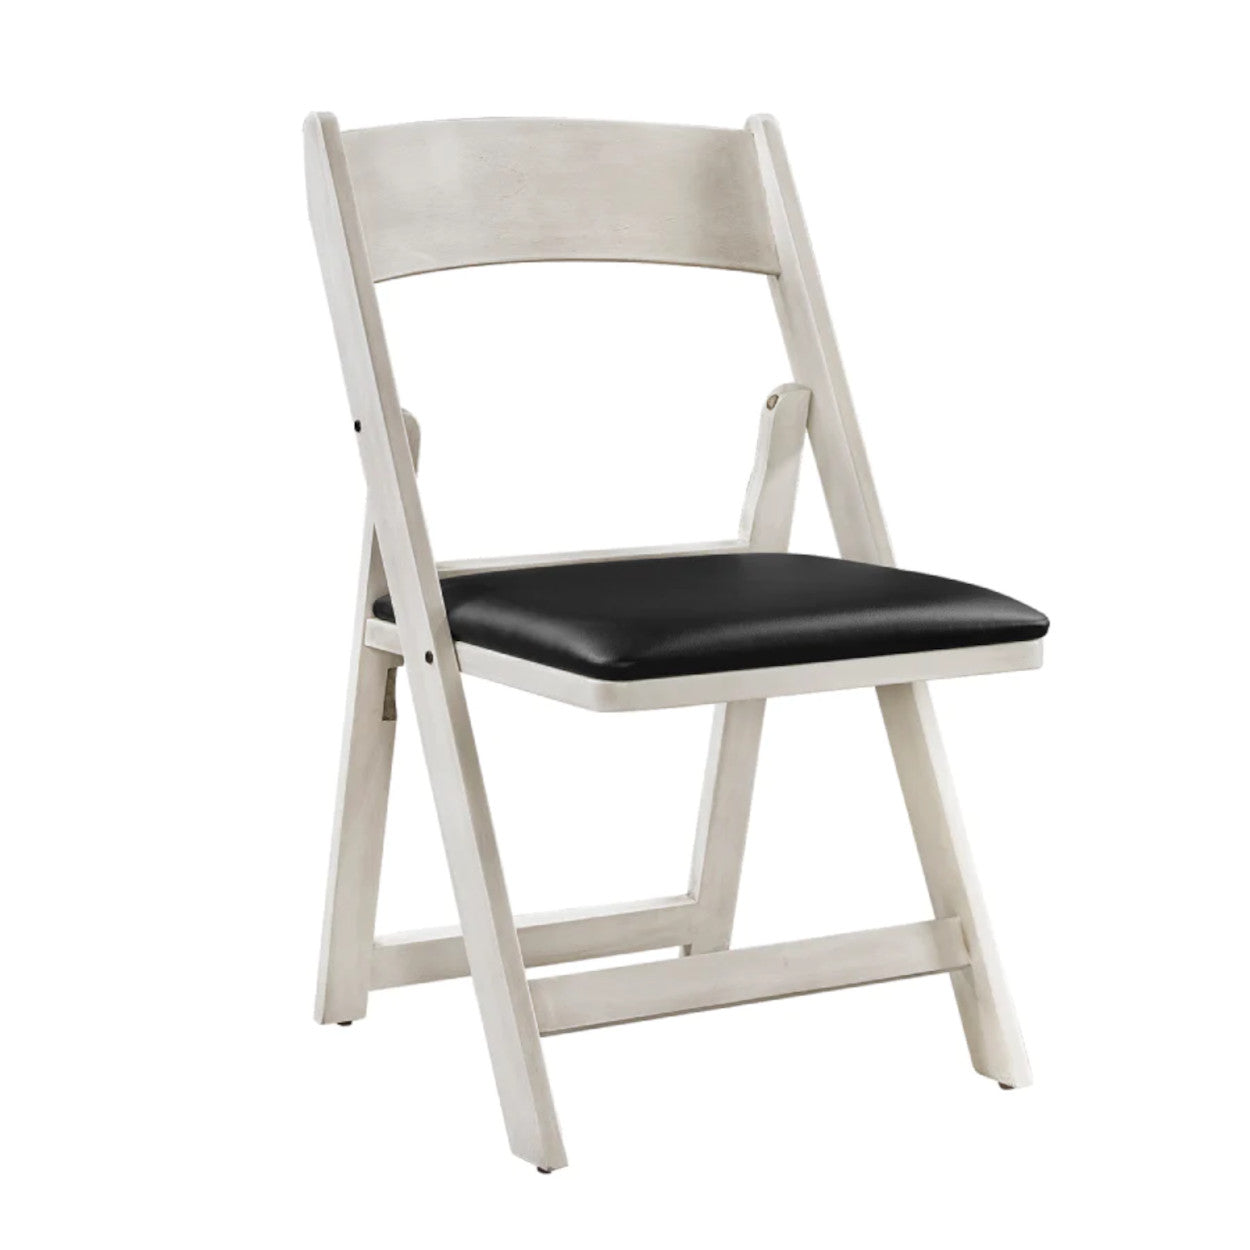 Wood vinyl padded folding chair in an antique white finish.